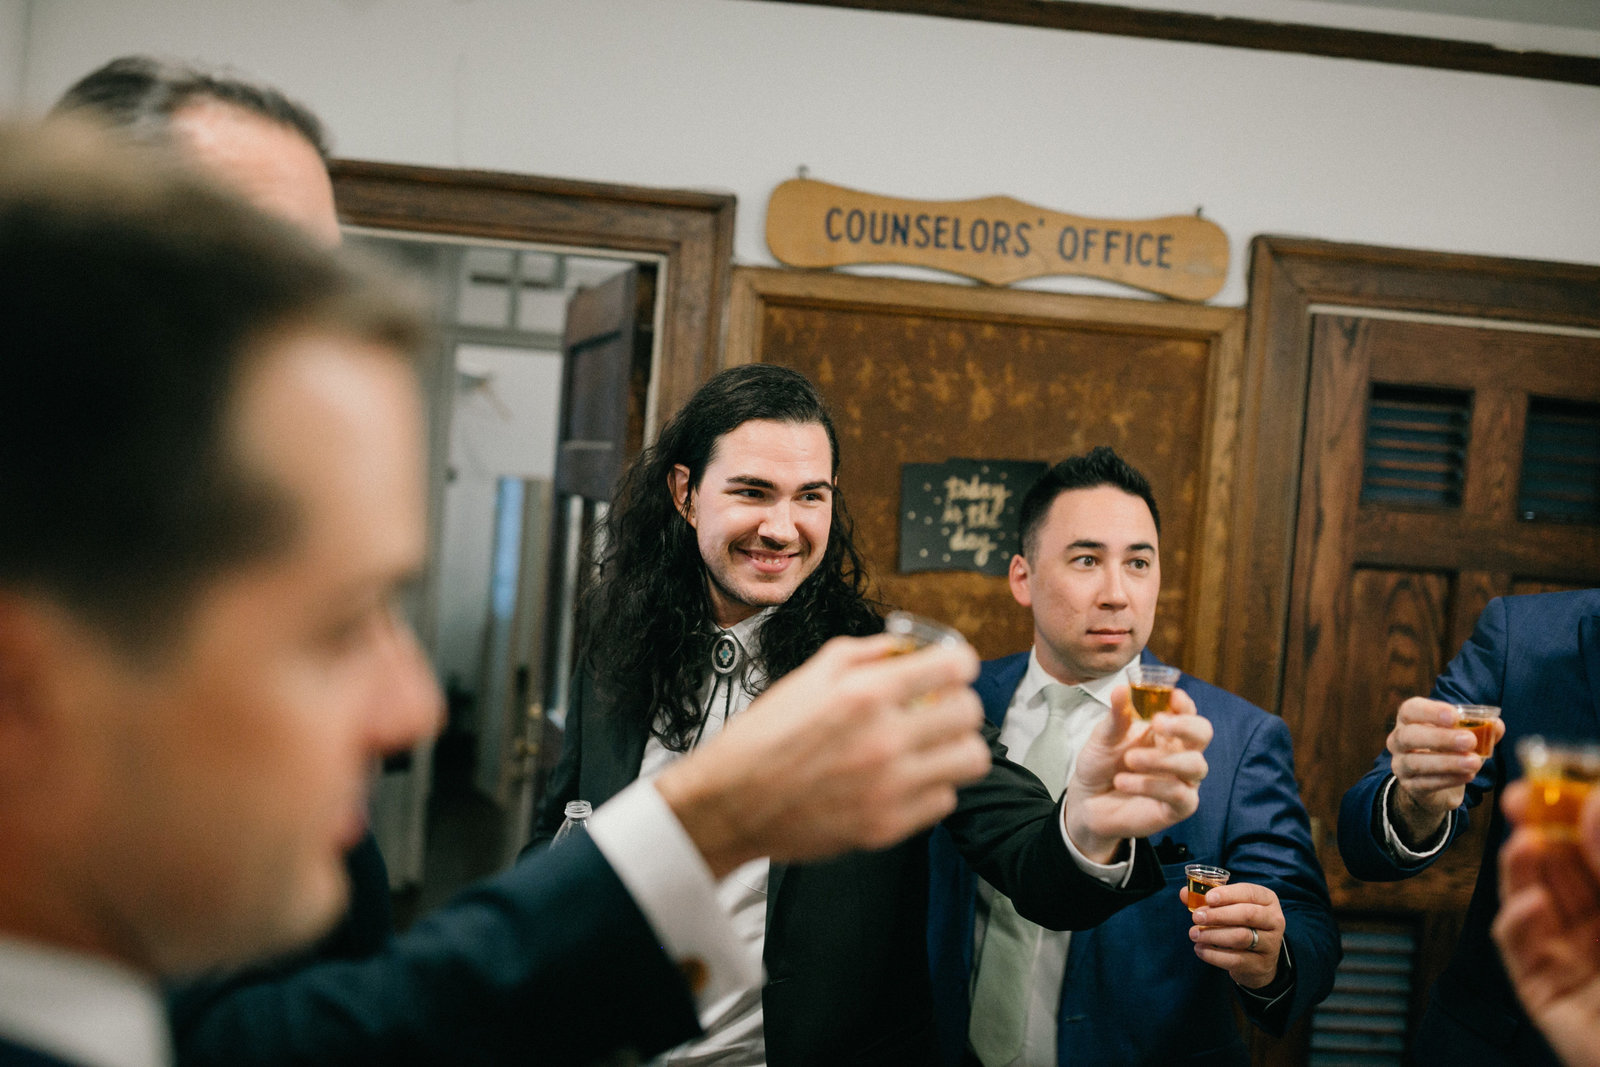 Let's hear it for the boys! Groom and his groomsmen take a shot before heading out for pictures.